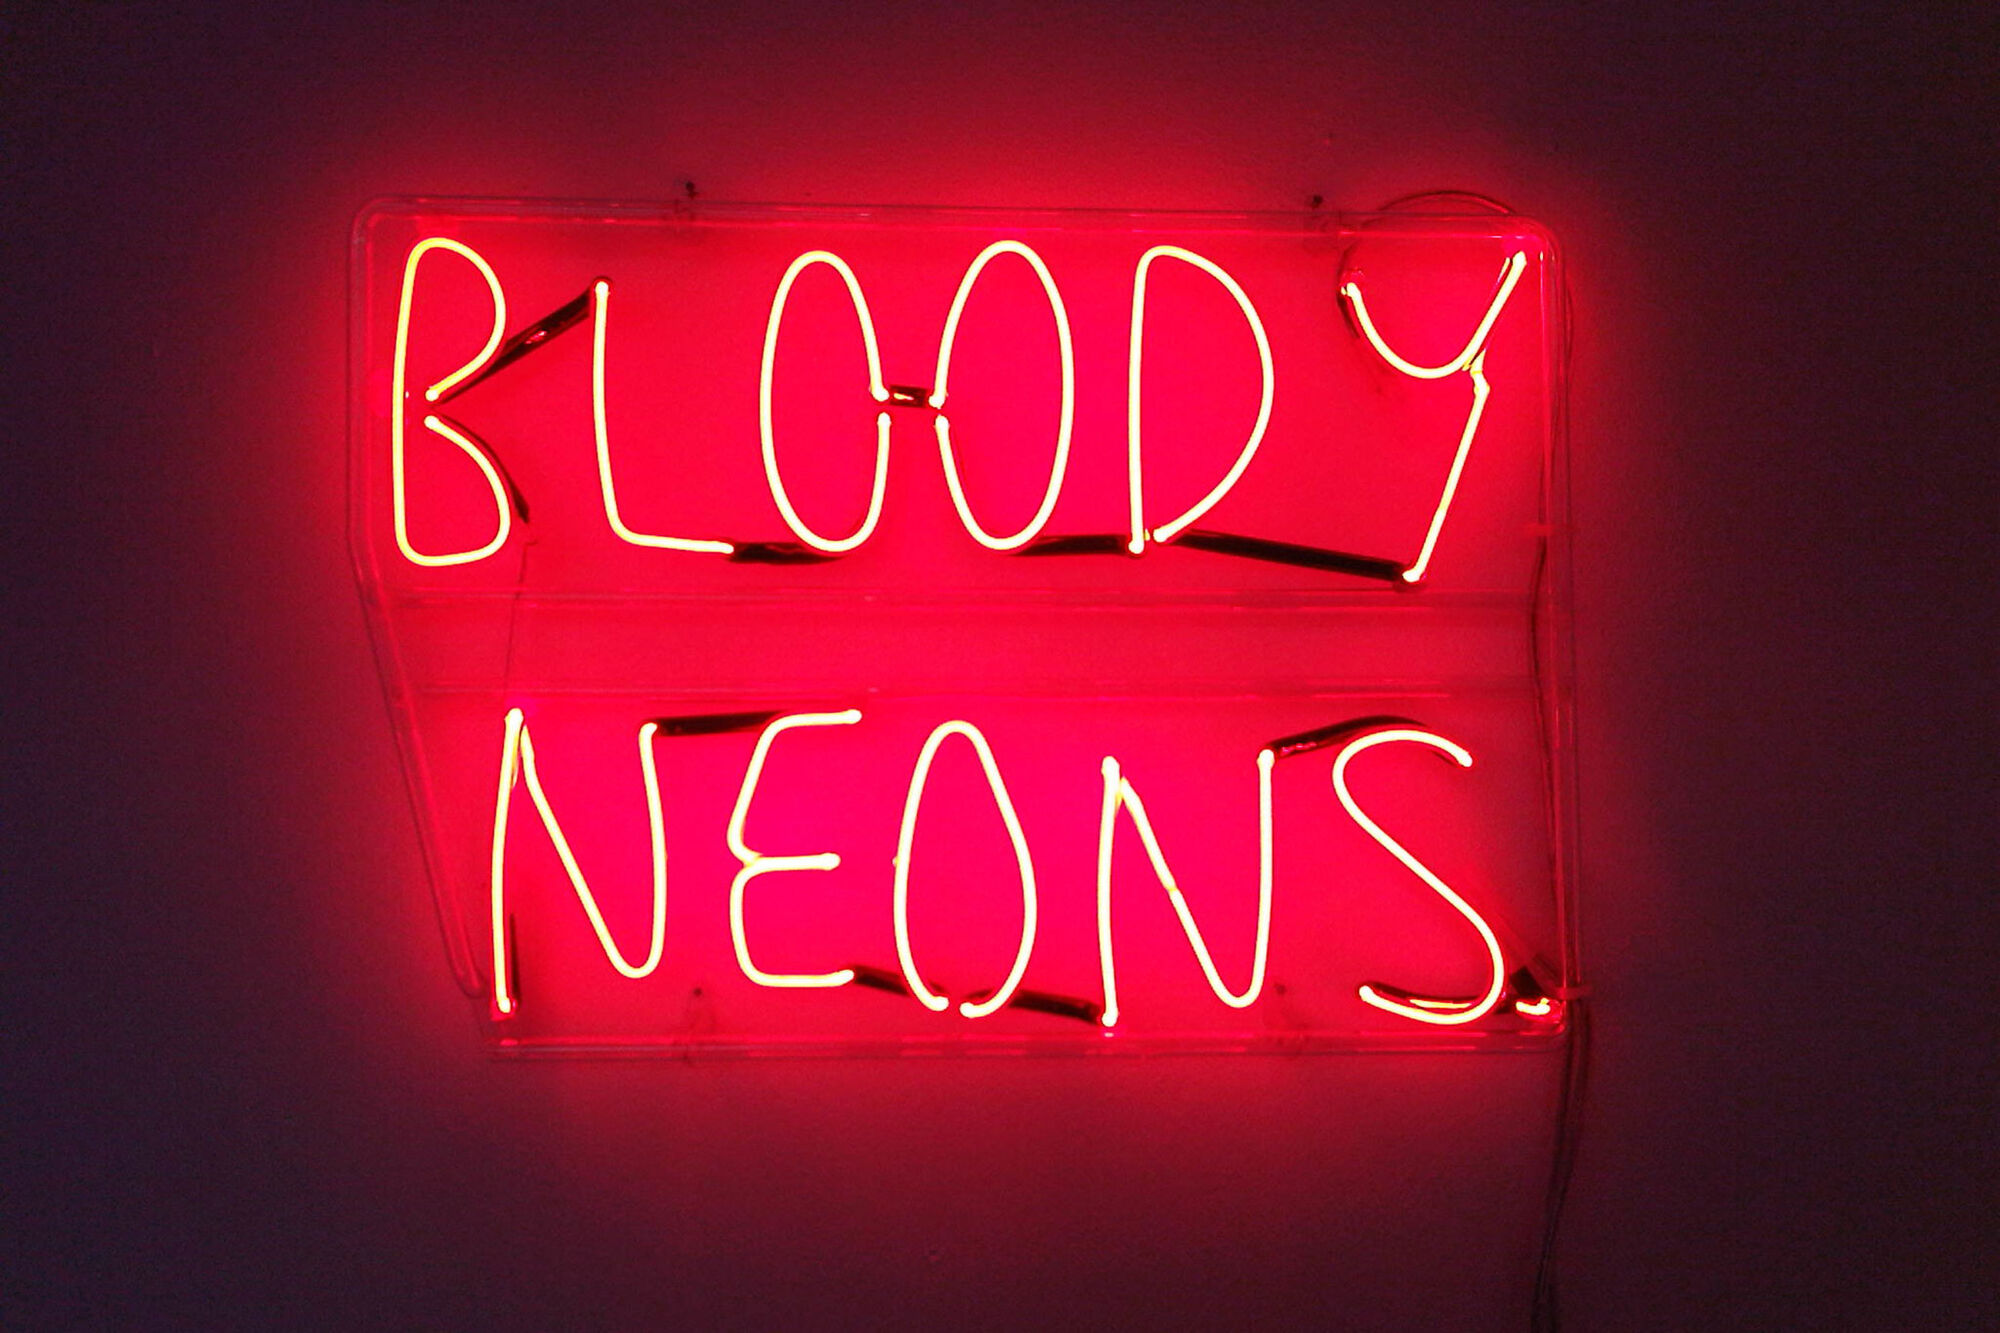 The Wick - Bloody Neons, Sarah Maple